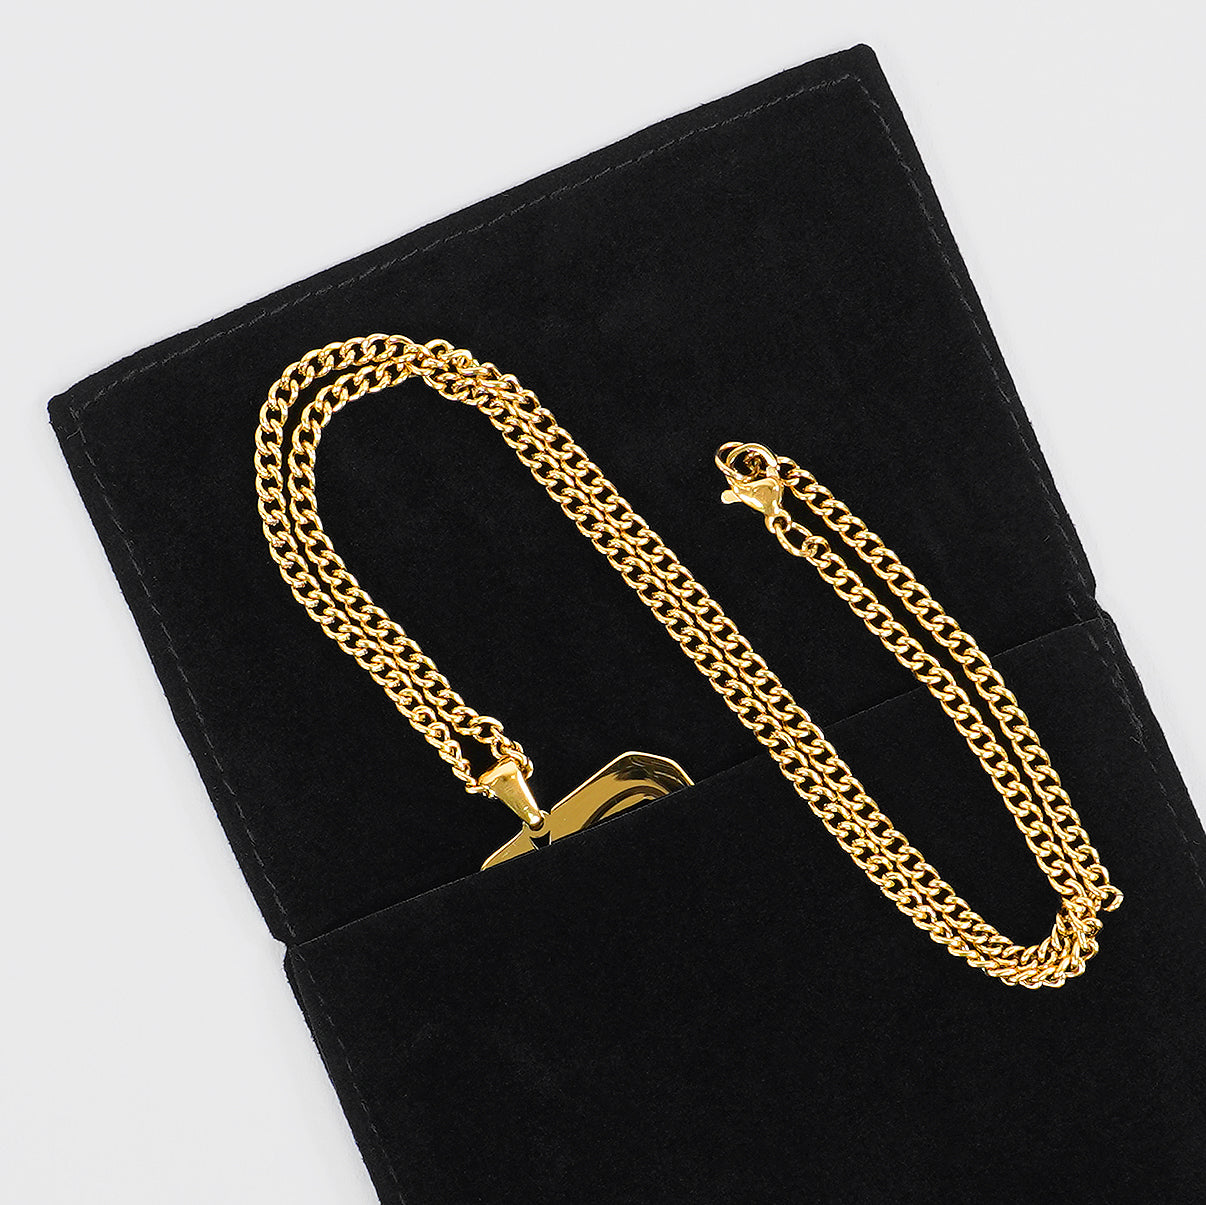 25 Number Pendant with Chain Necklace - Gold Plated Stainless Steel